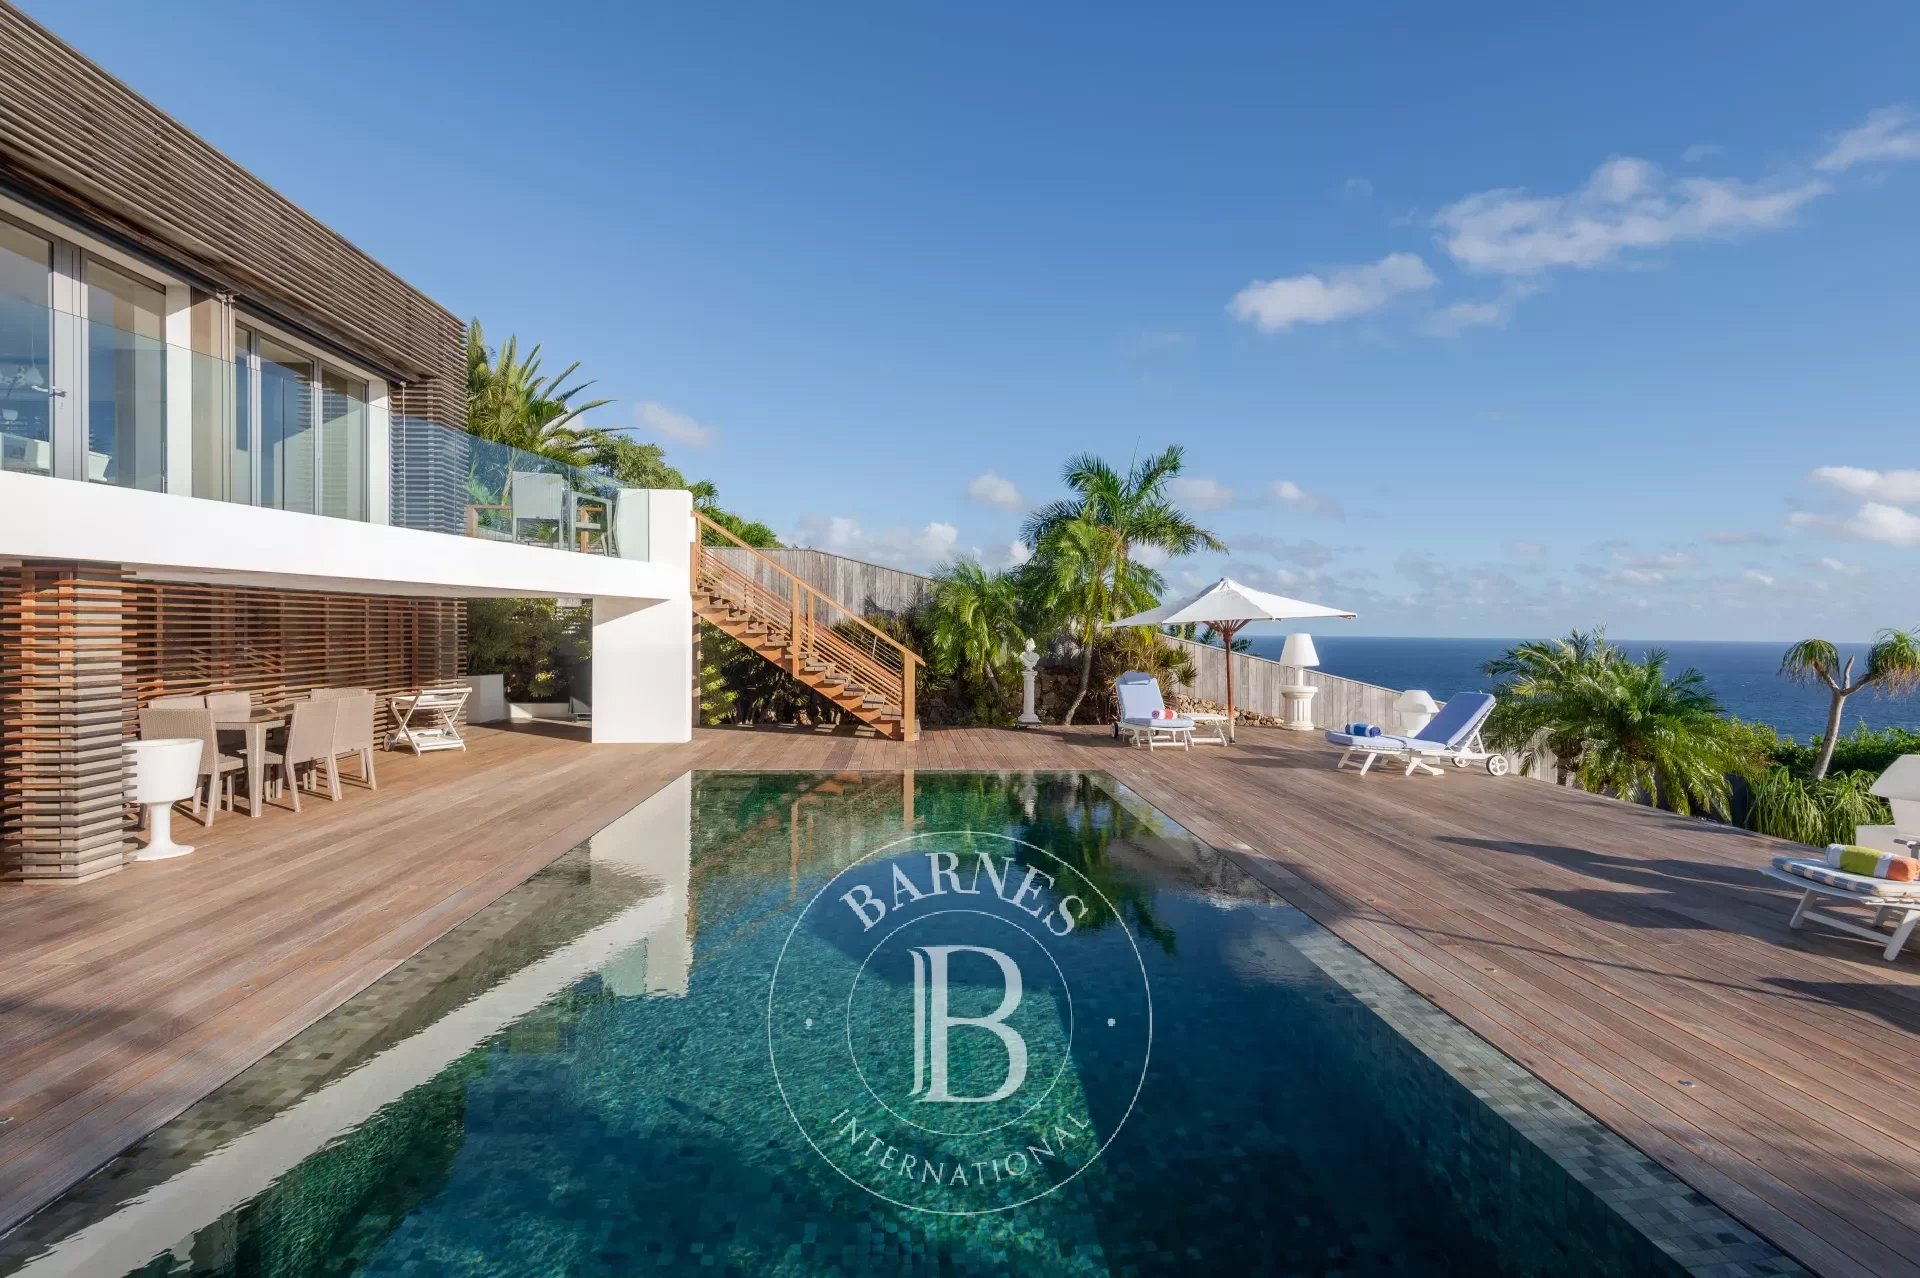 4 -Bedroom Villa in St.Barths - picture 6 title=